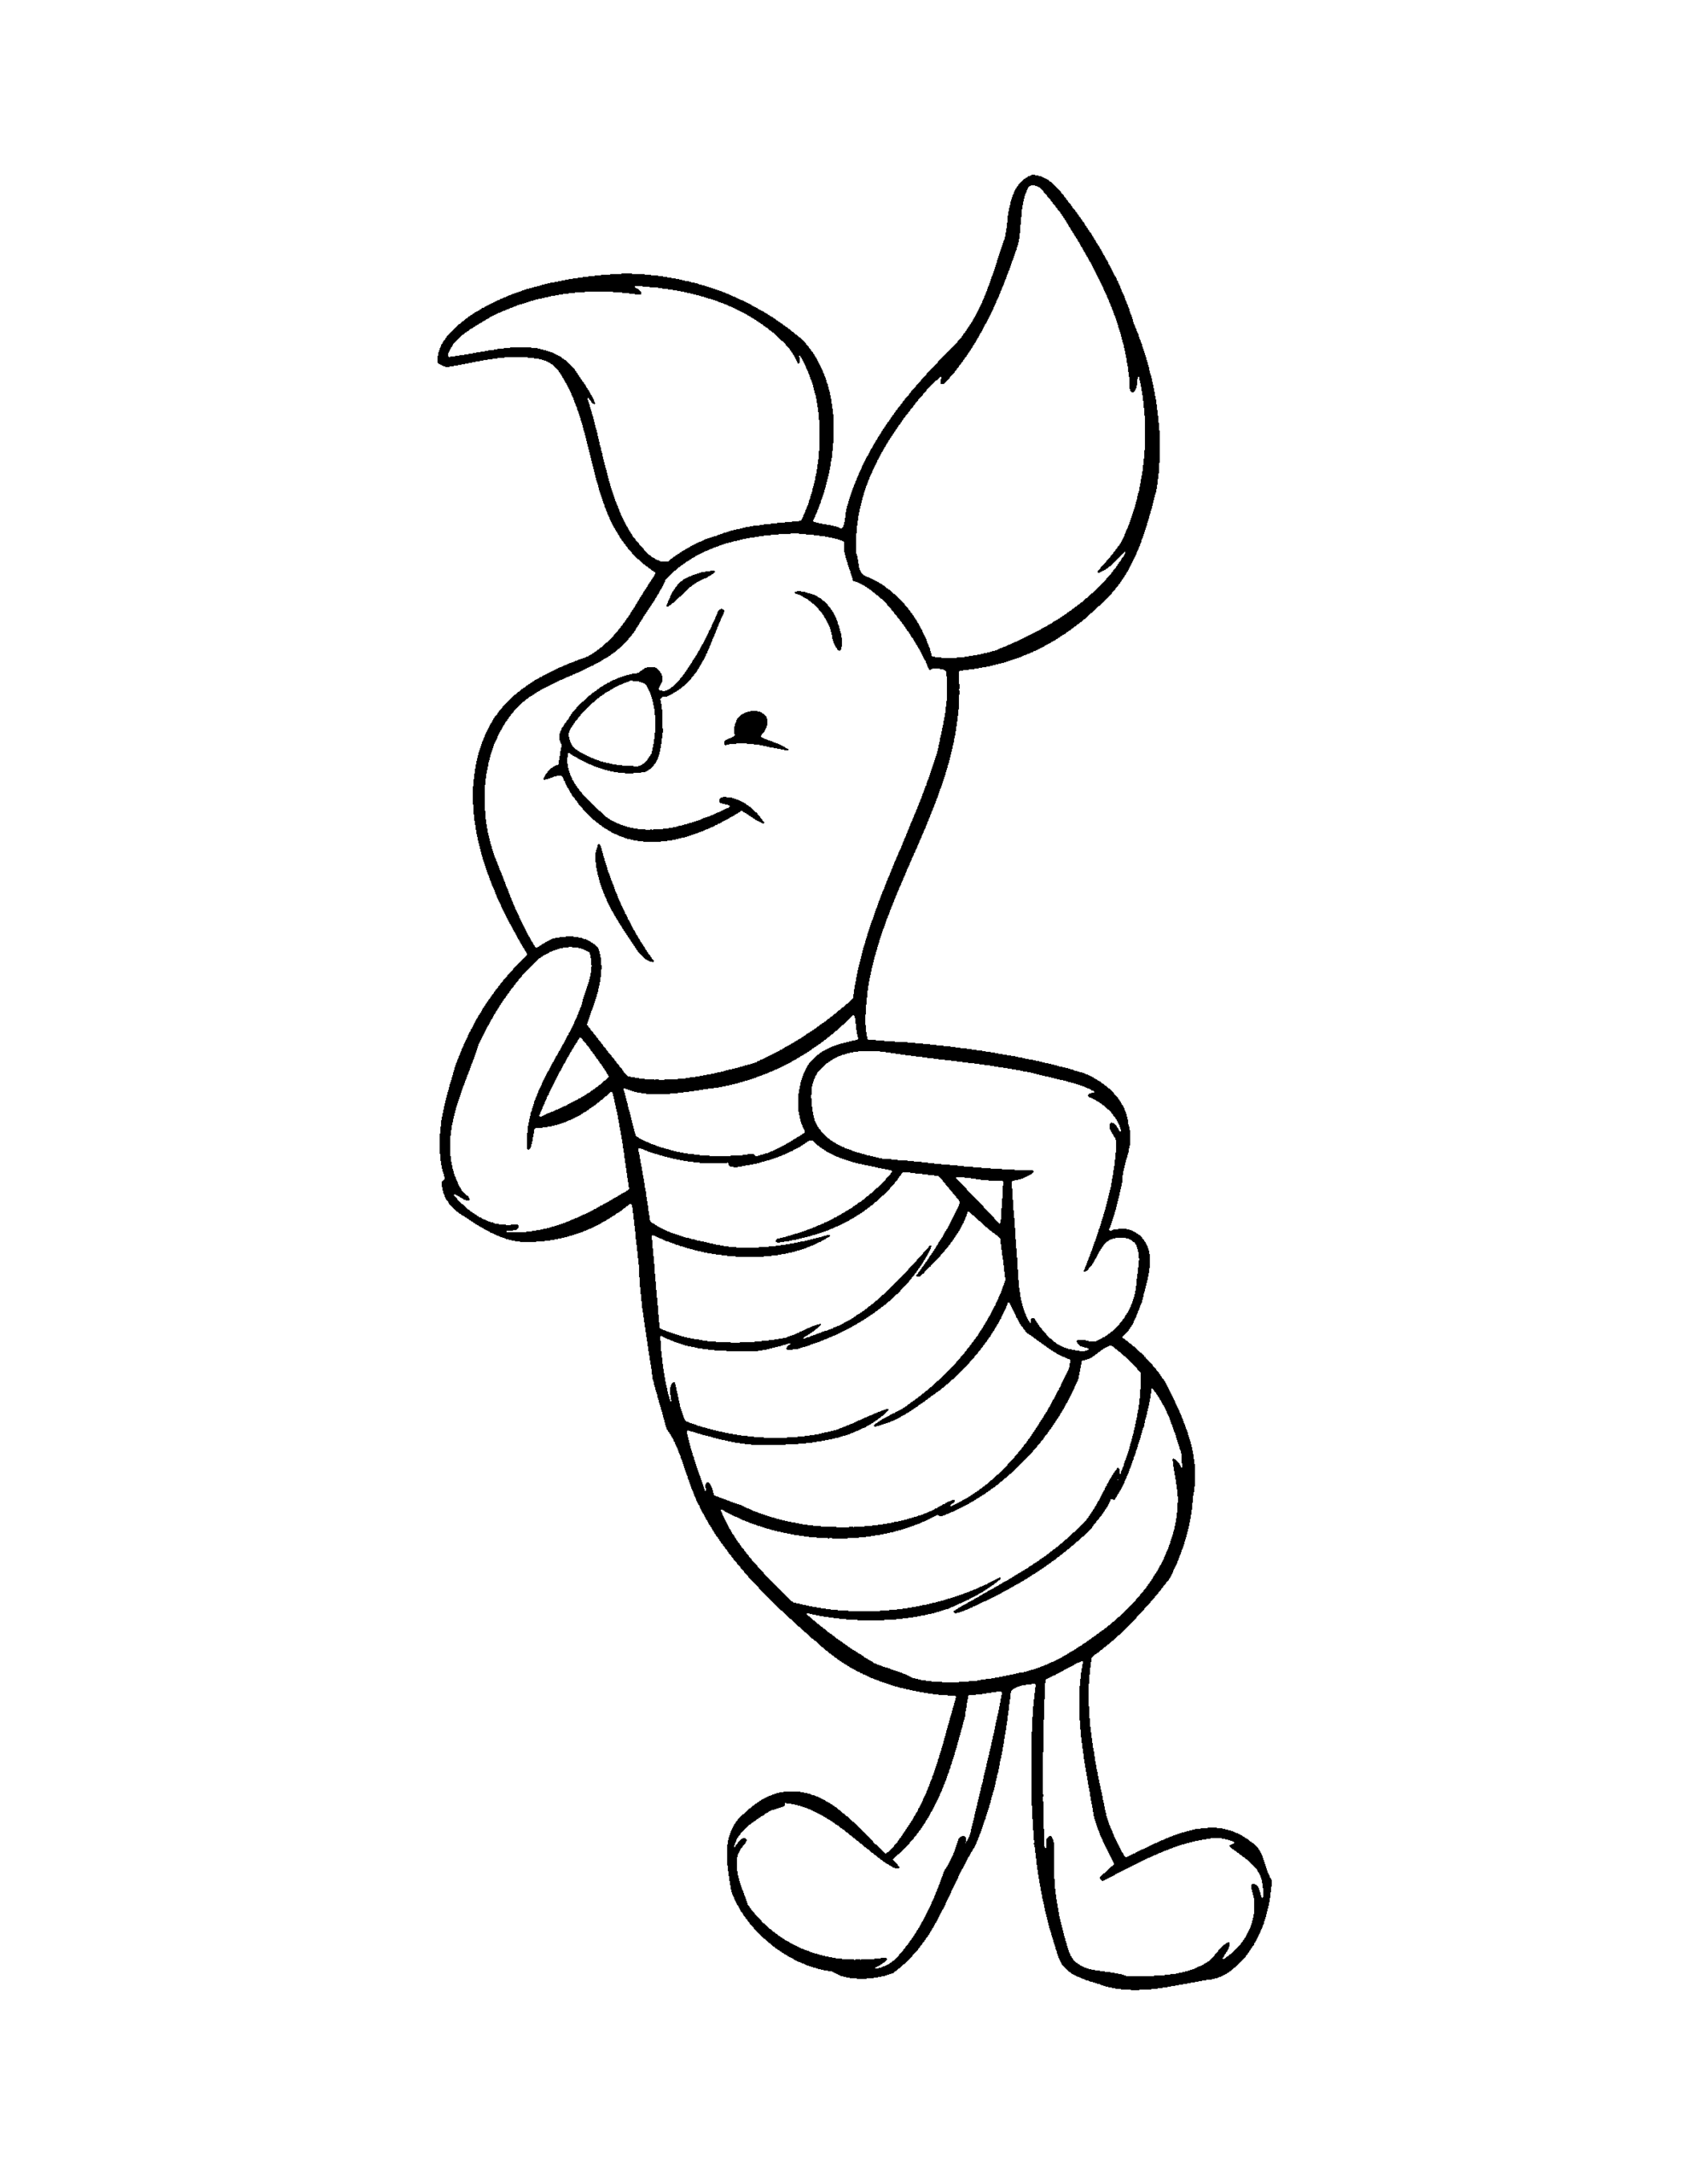 Winnie the Pooh Coloring Pages Cartoons winnie the pooh 38 Printable 2020 7144 Coloring4free